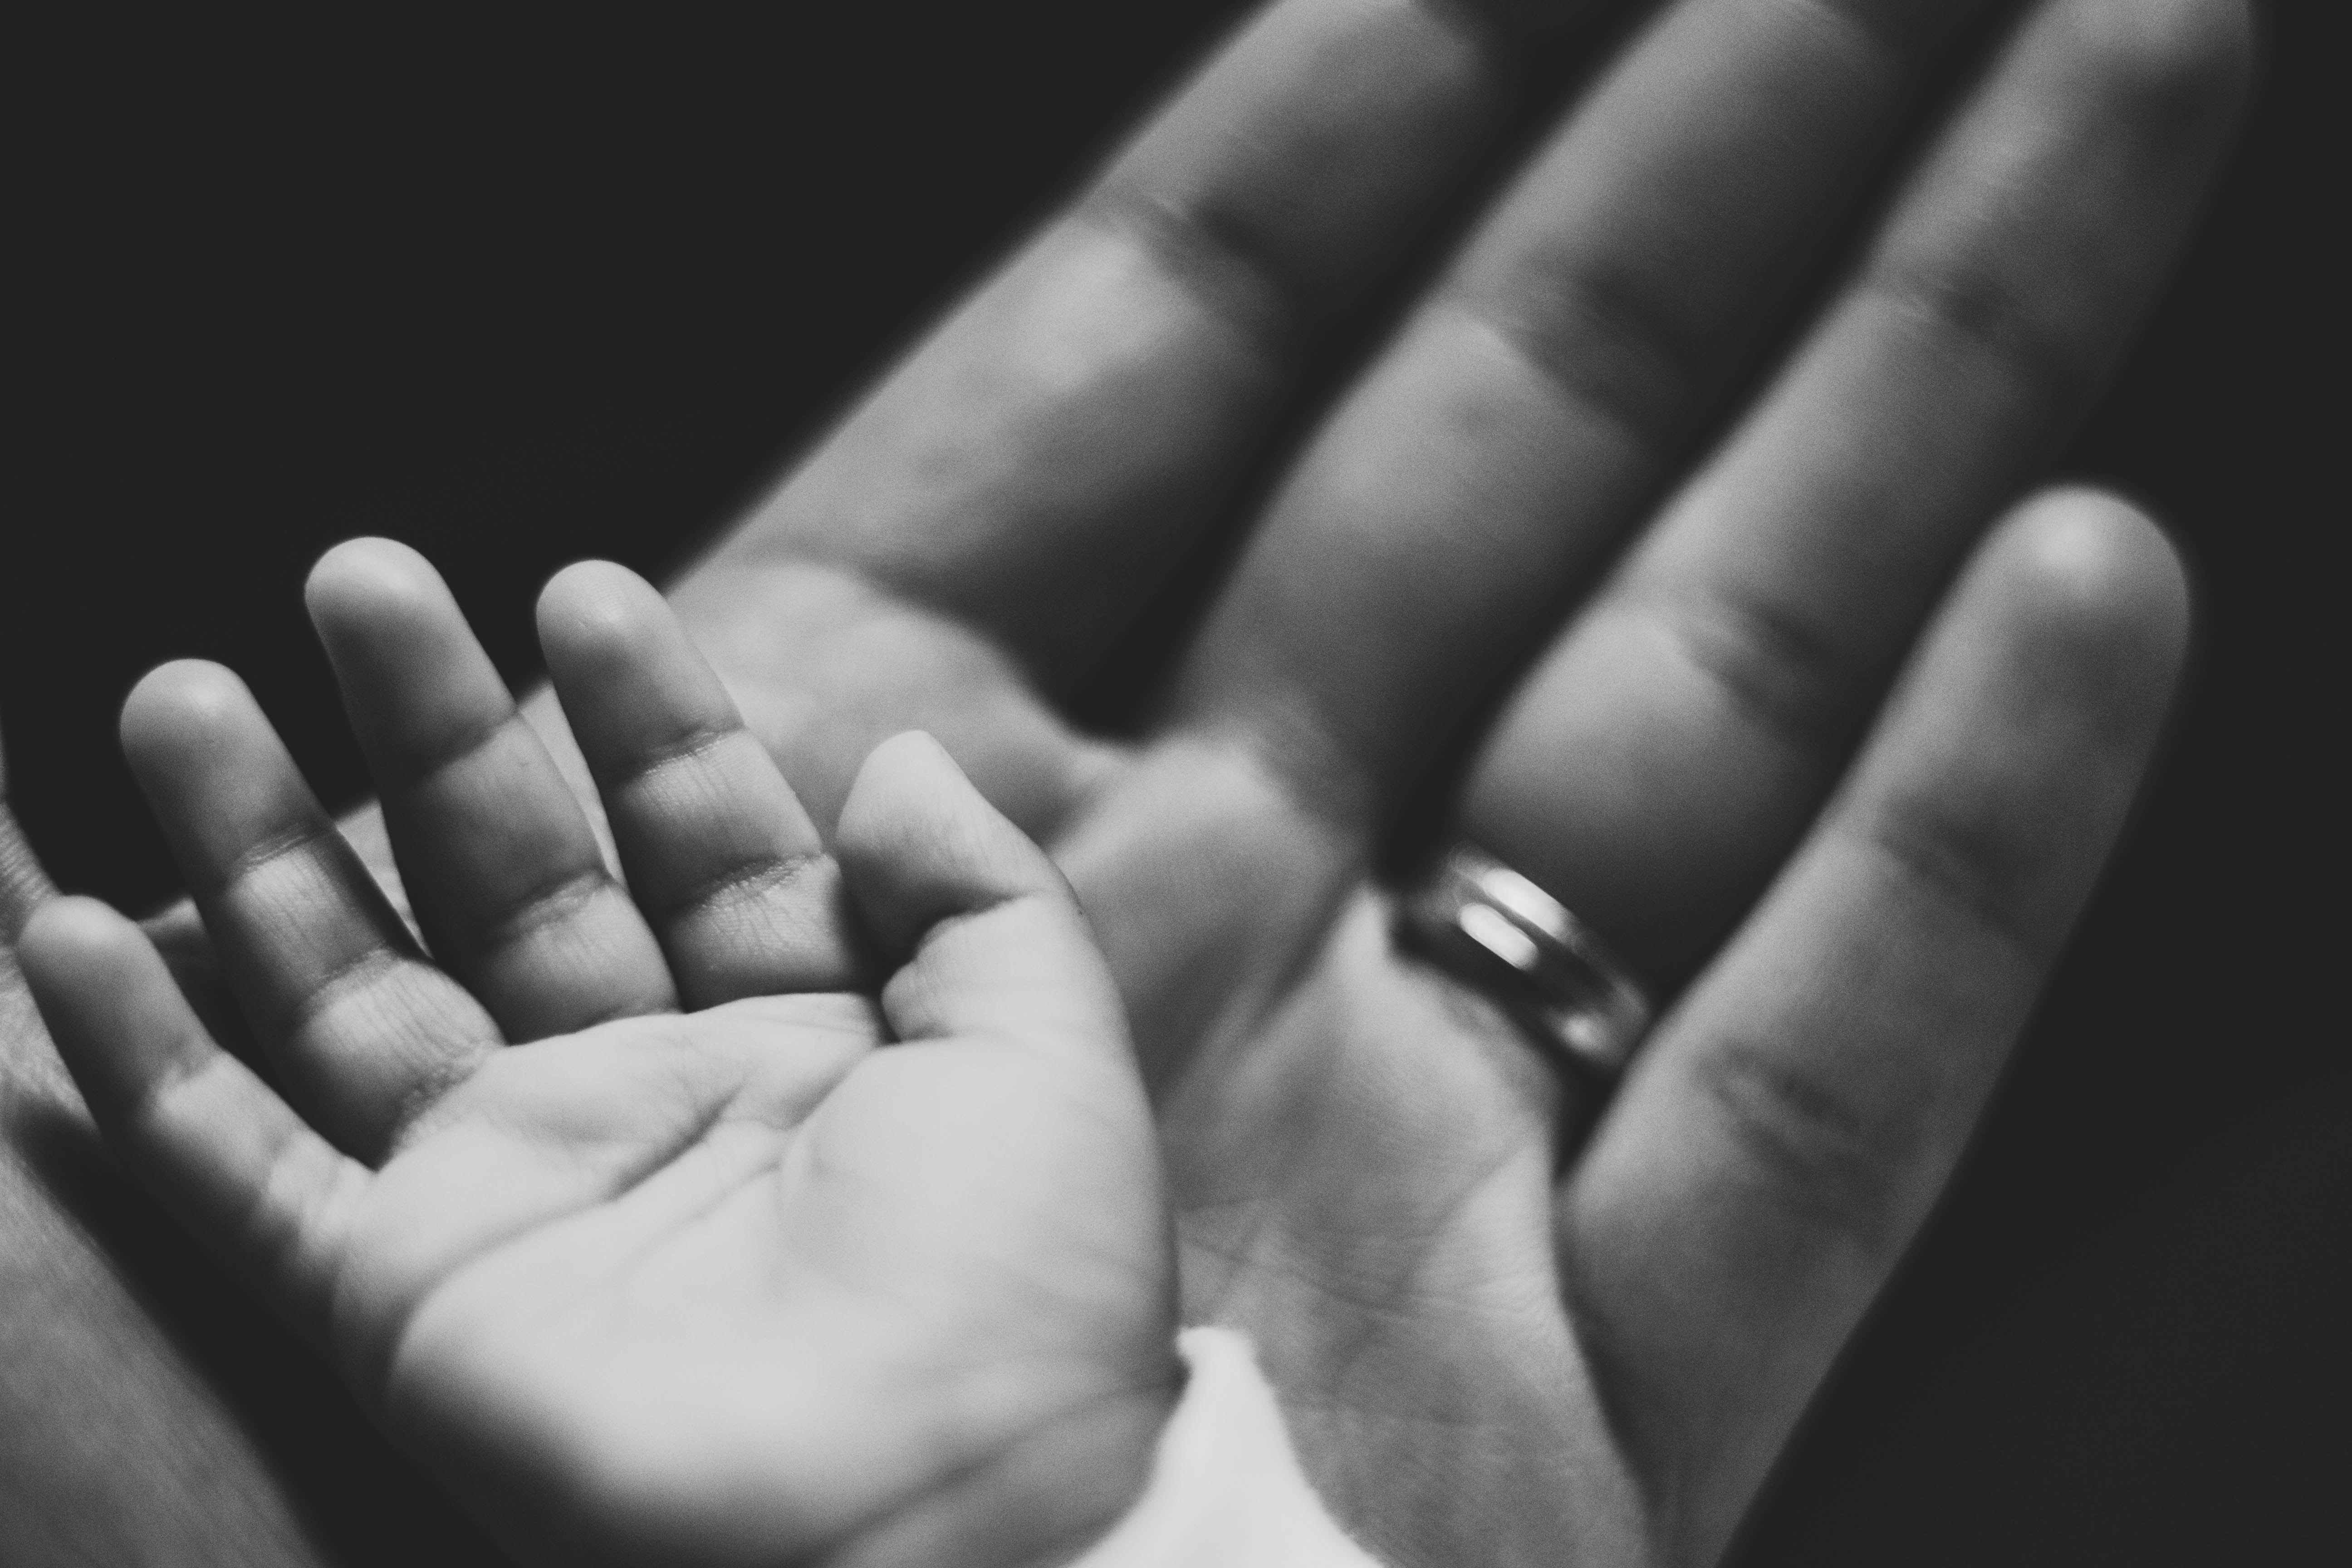 A child's hand resting on a father's hand